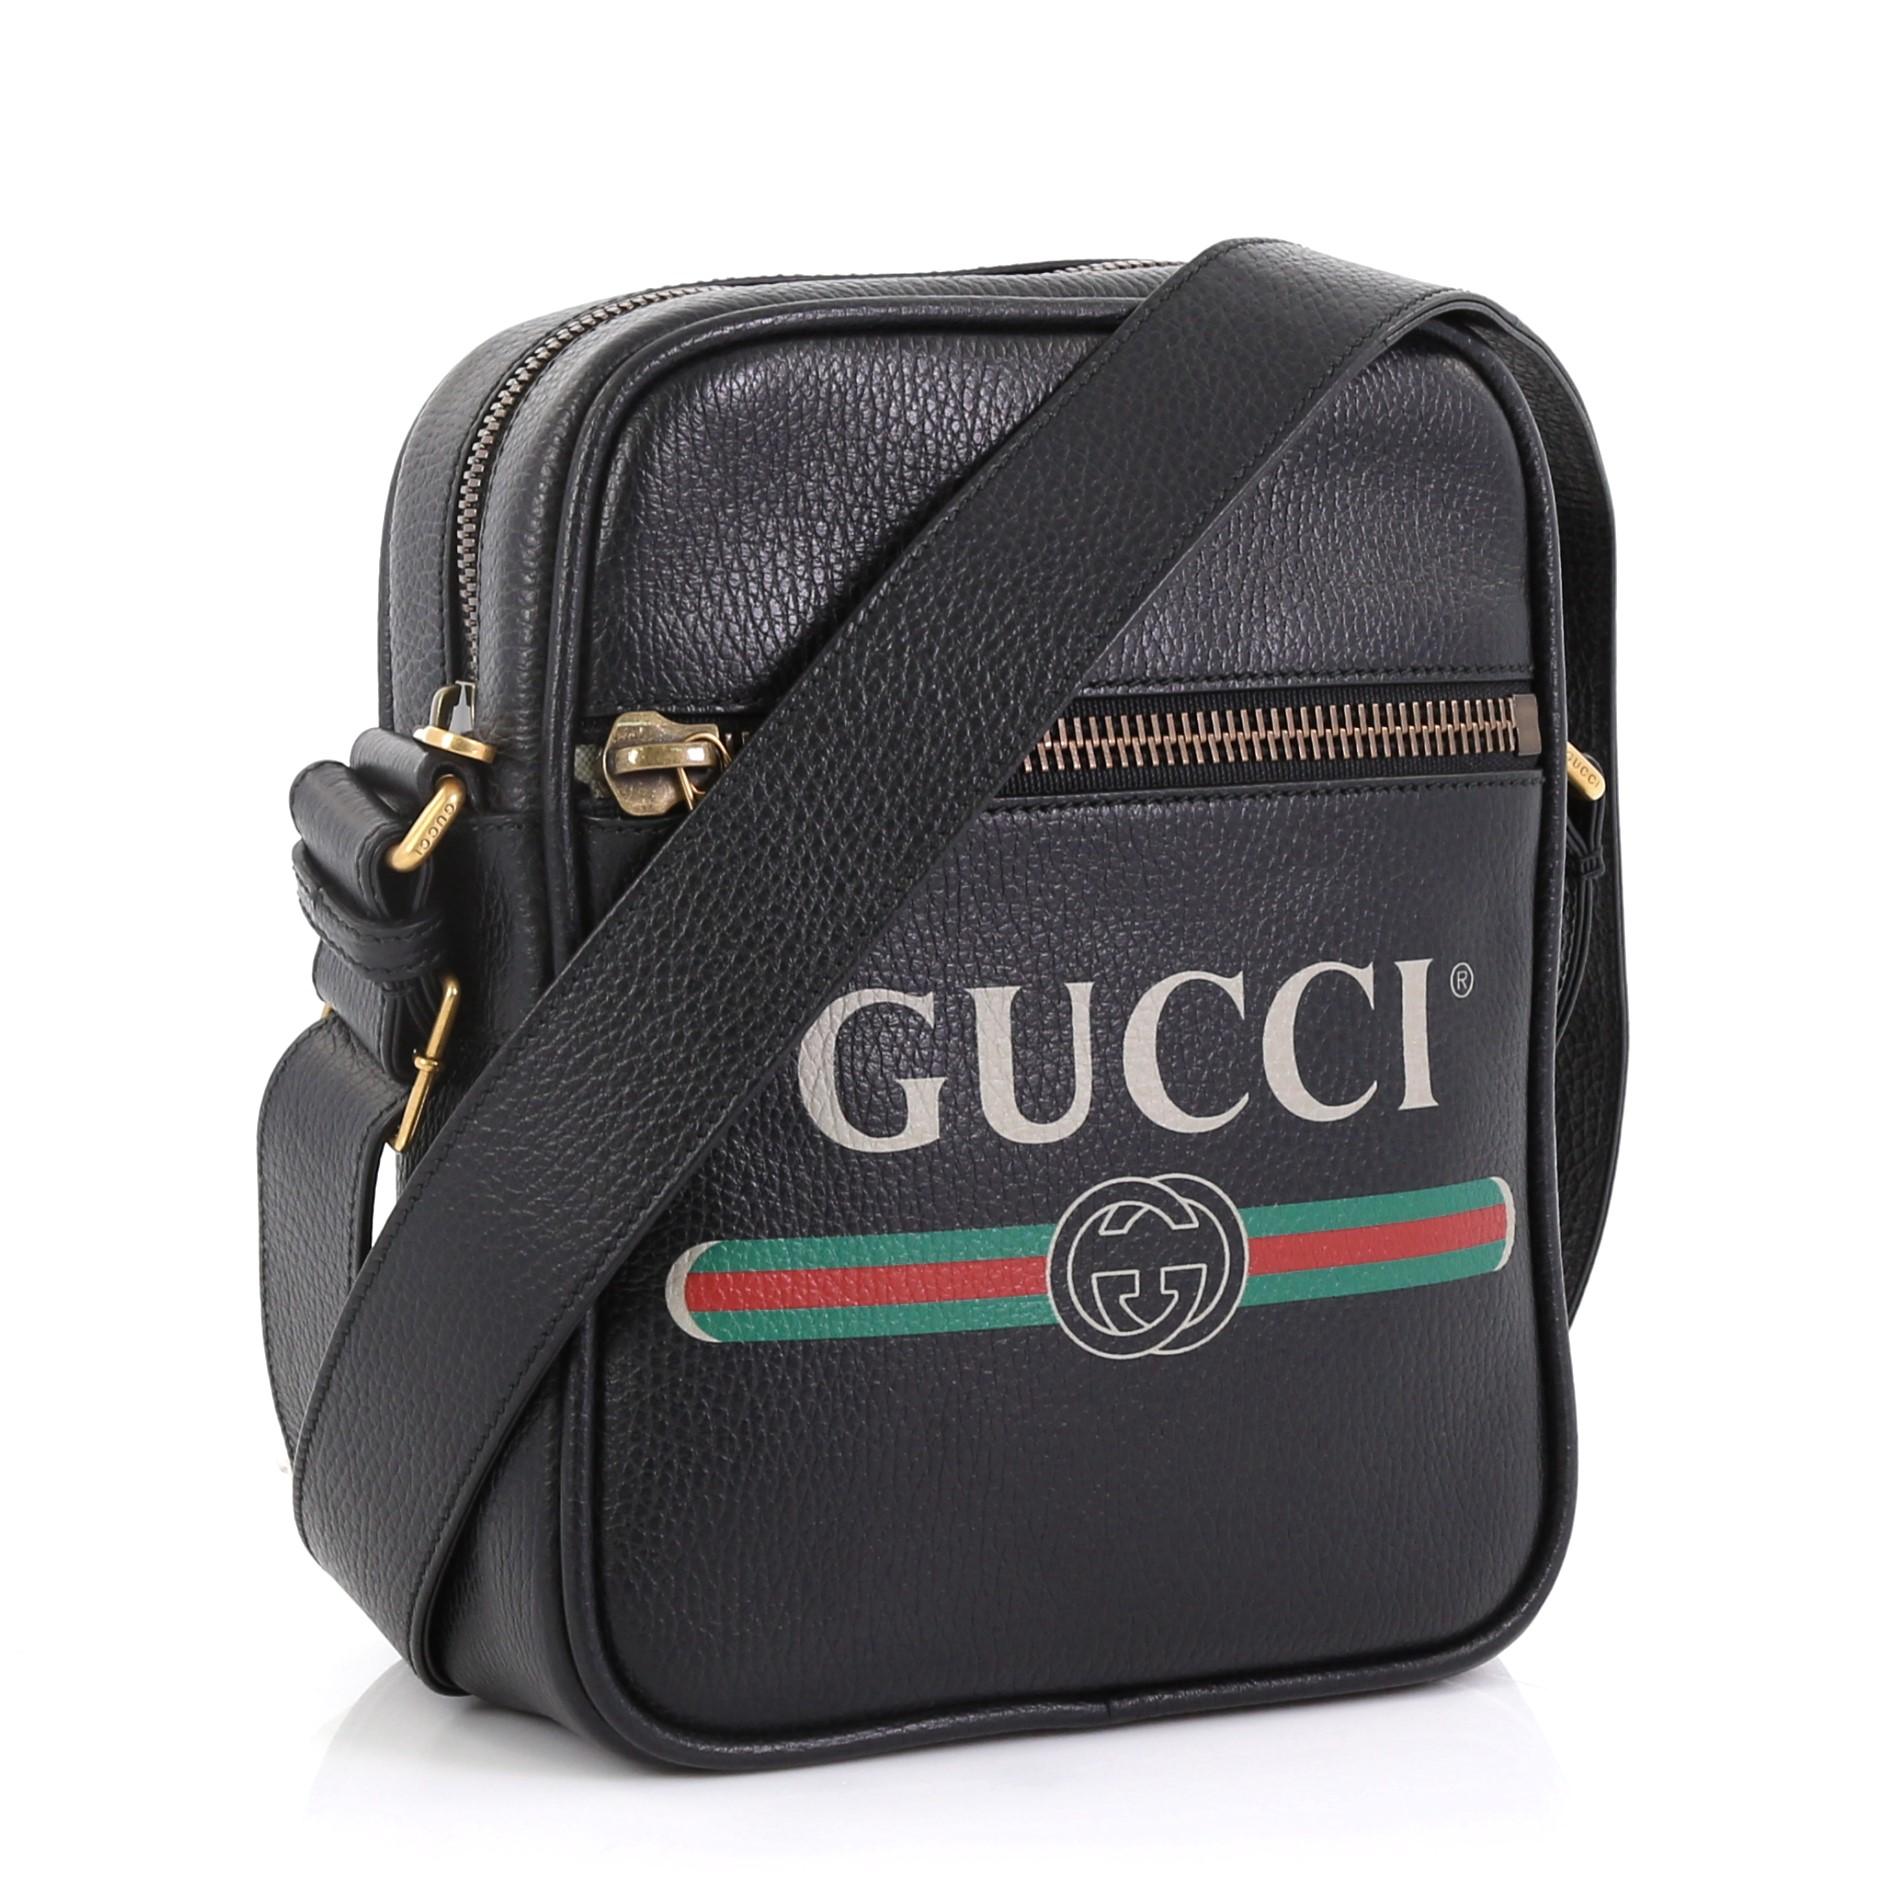 This Gucci Logo Zip Messenger Bag Printed Leather Small, crafted from black printed leather, features adjustable leather strap, front zip pocket, printed Gucci vintage logo, and aged gold-tone hardware. Its top zip closure opens to a beige canvas